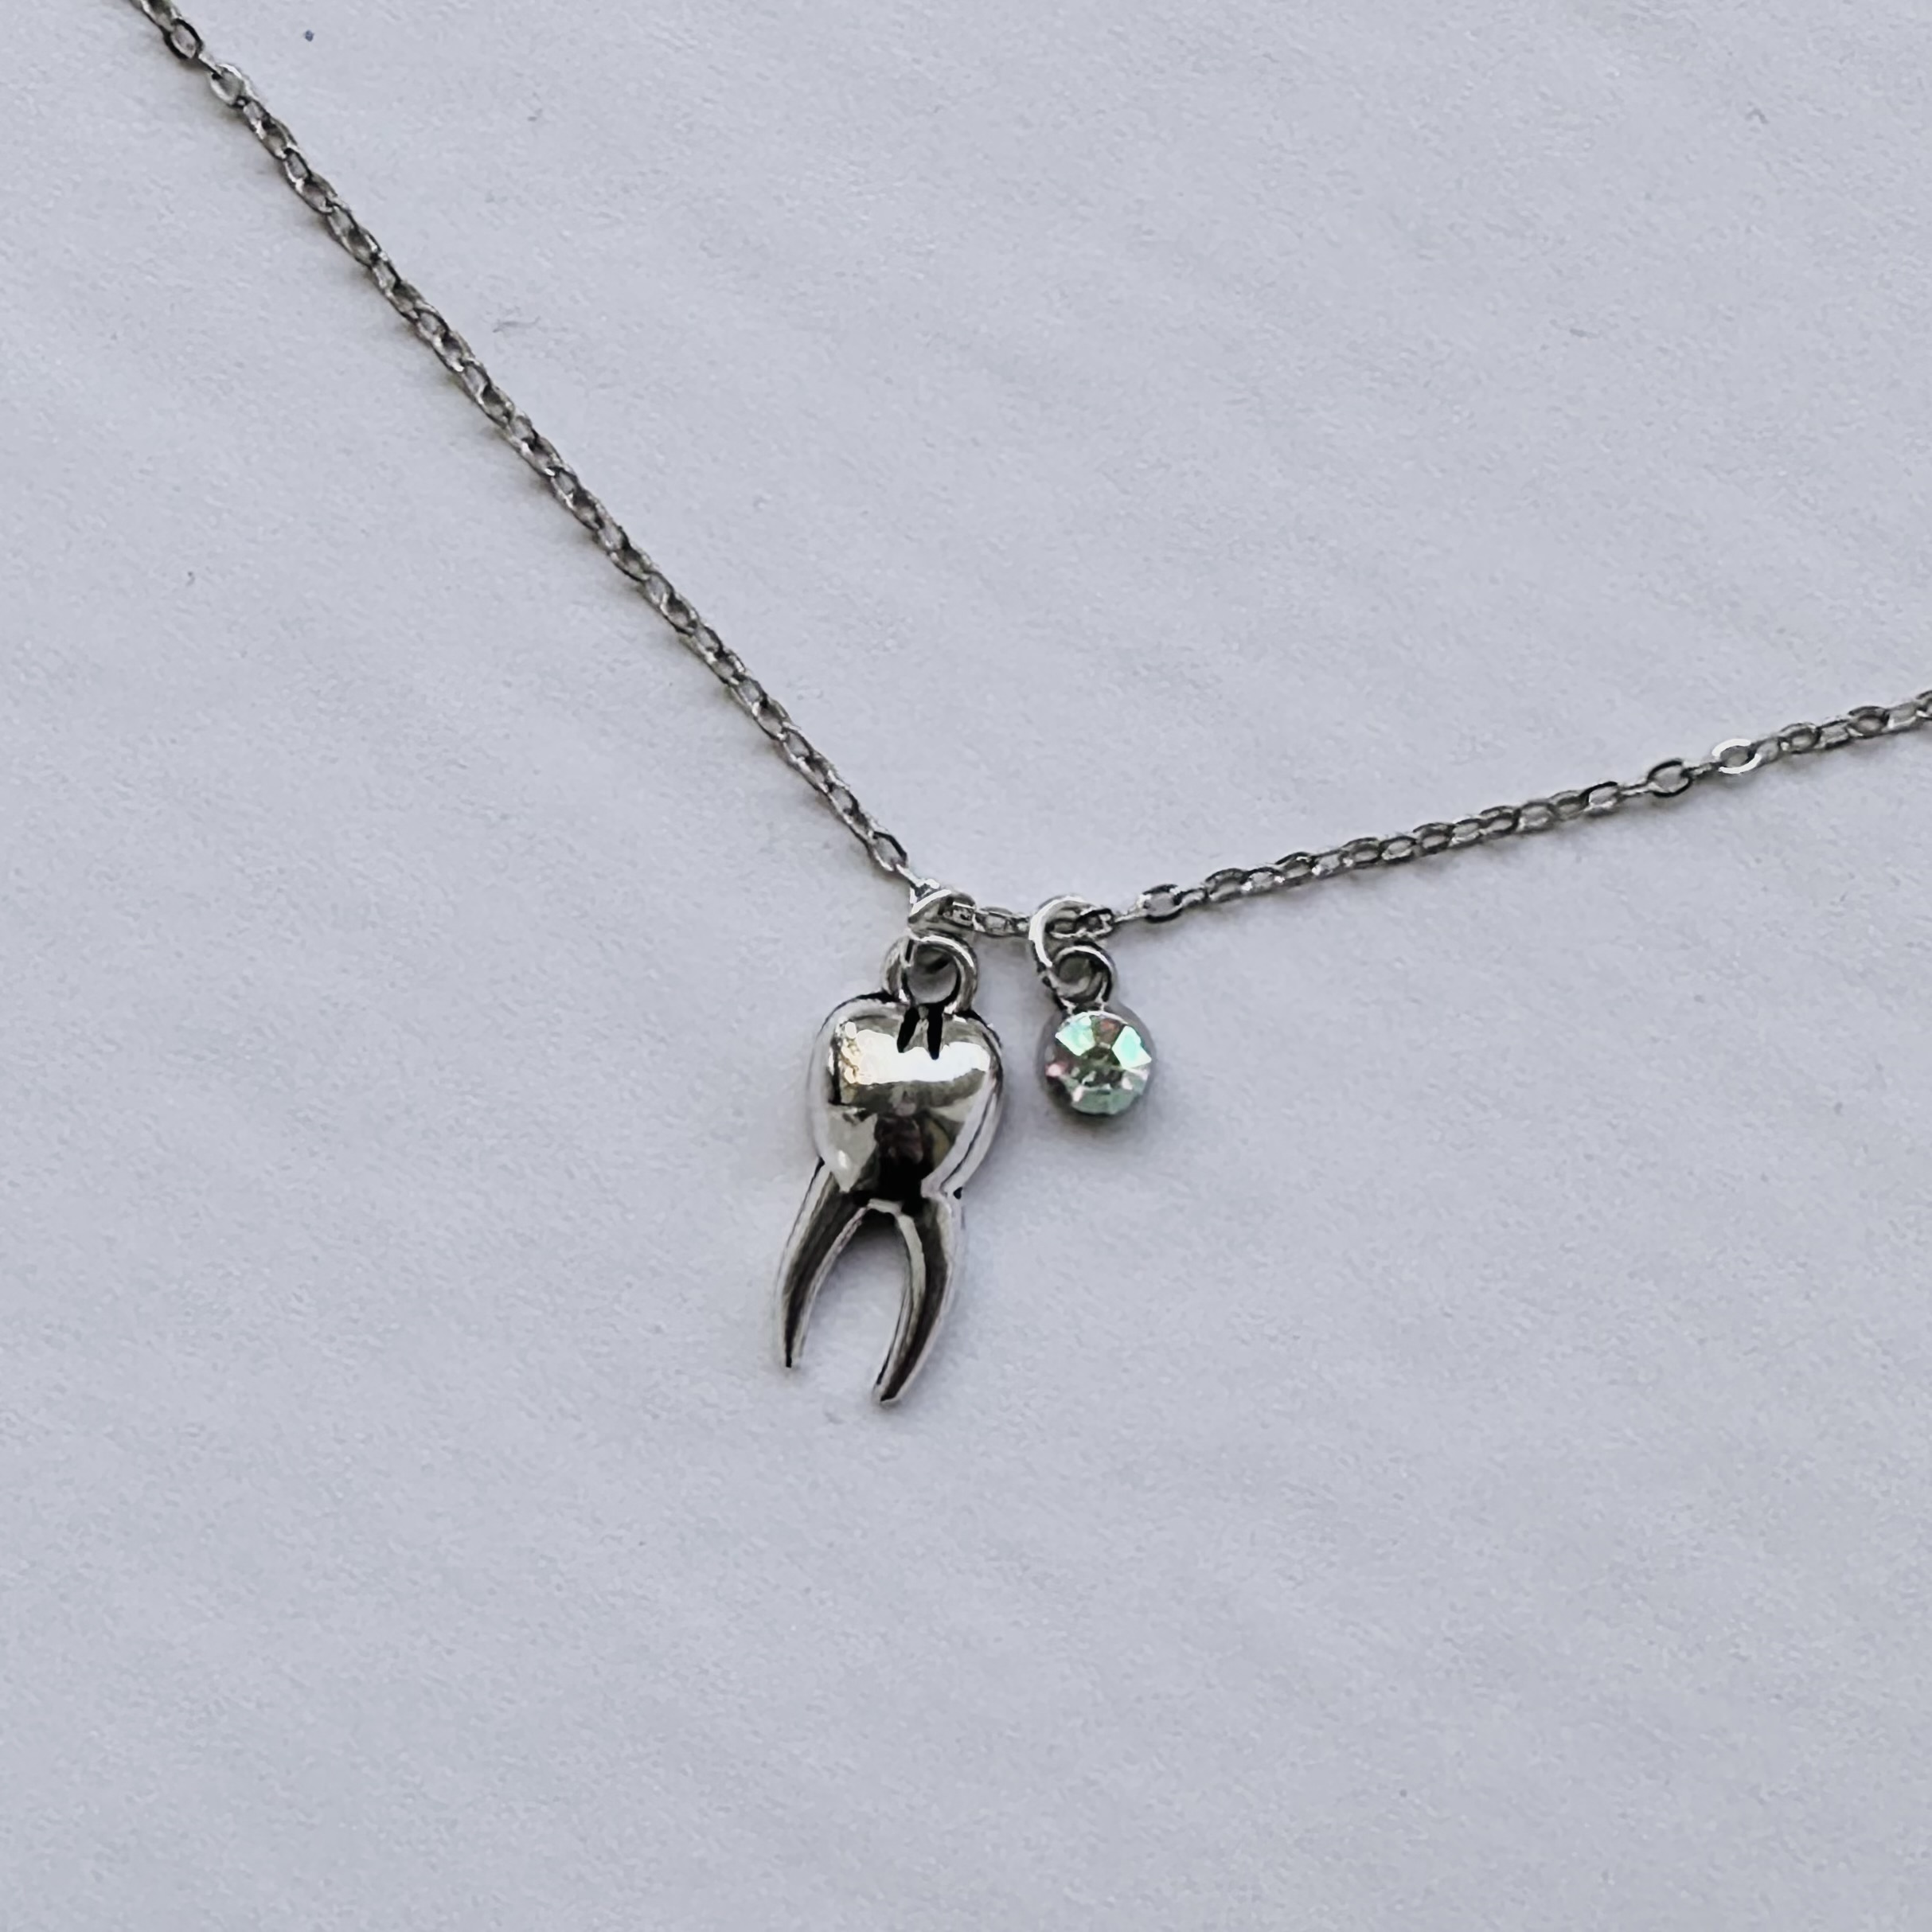 Dainty Tooth Charm Necklace